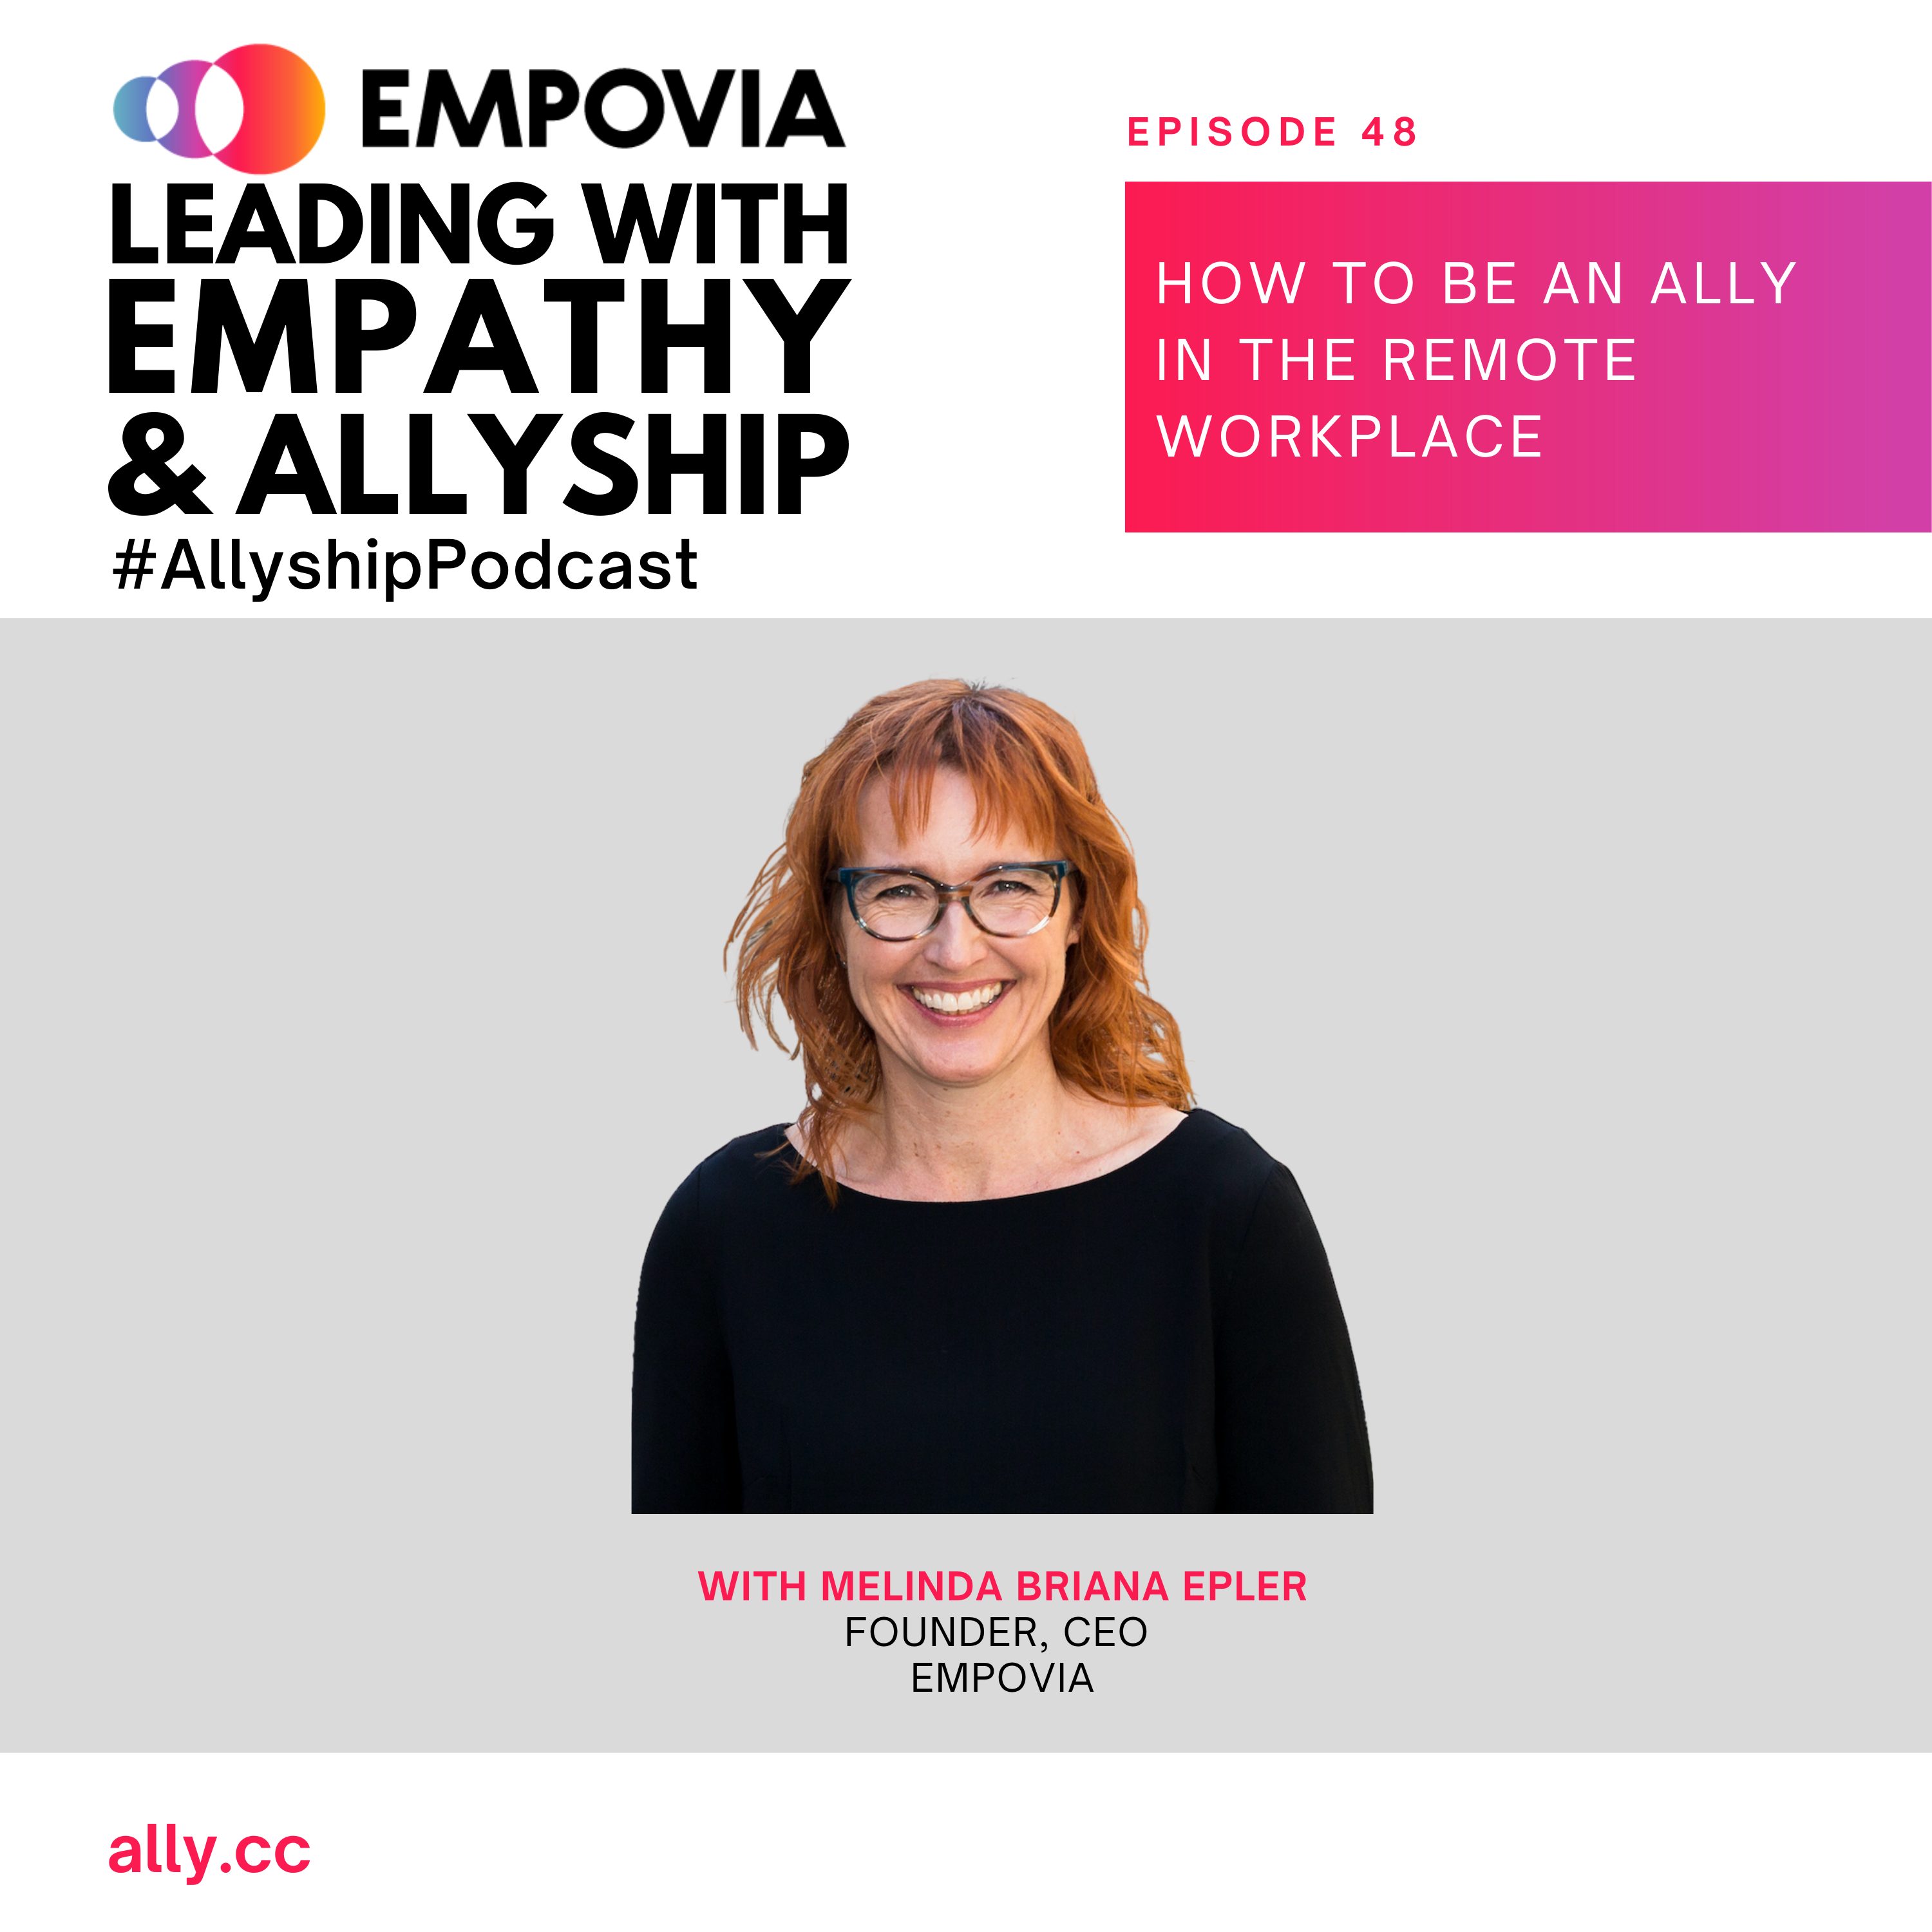 Leading With Empathy & Allyship promo with the Empovia logo, a photo of host Melinda Briana Epler, a White woman with red hair, glasses, and black shirt.